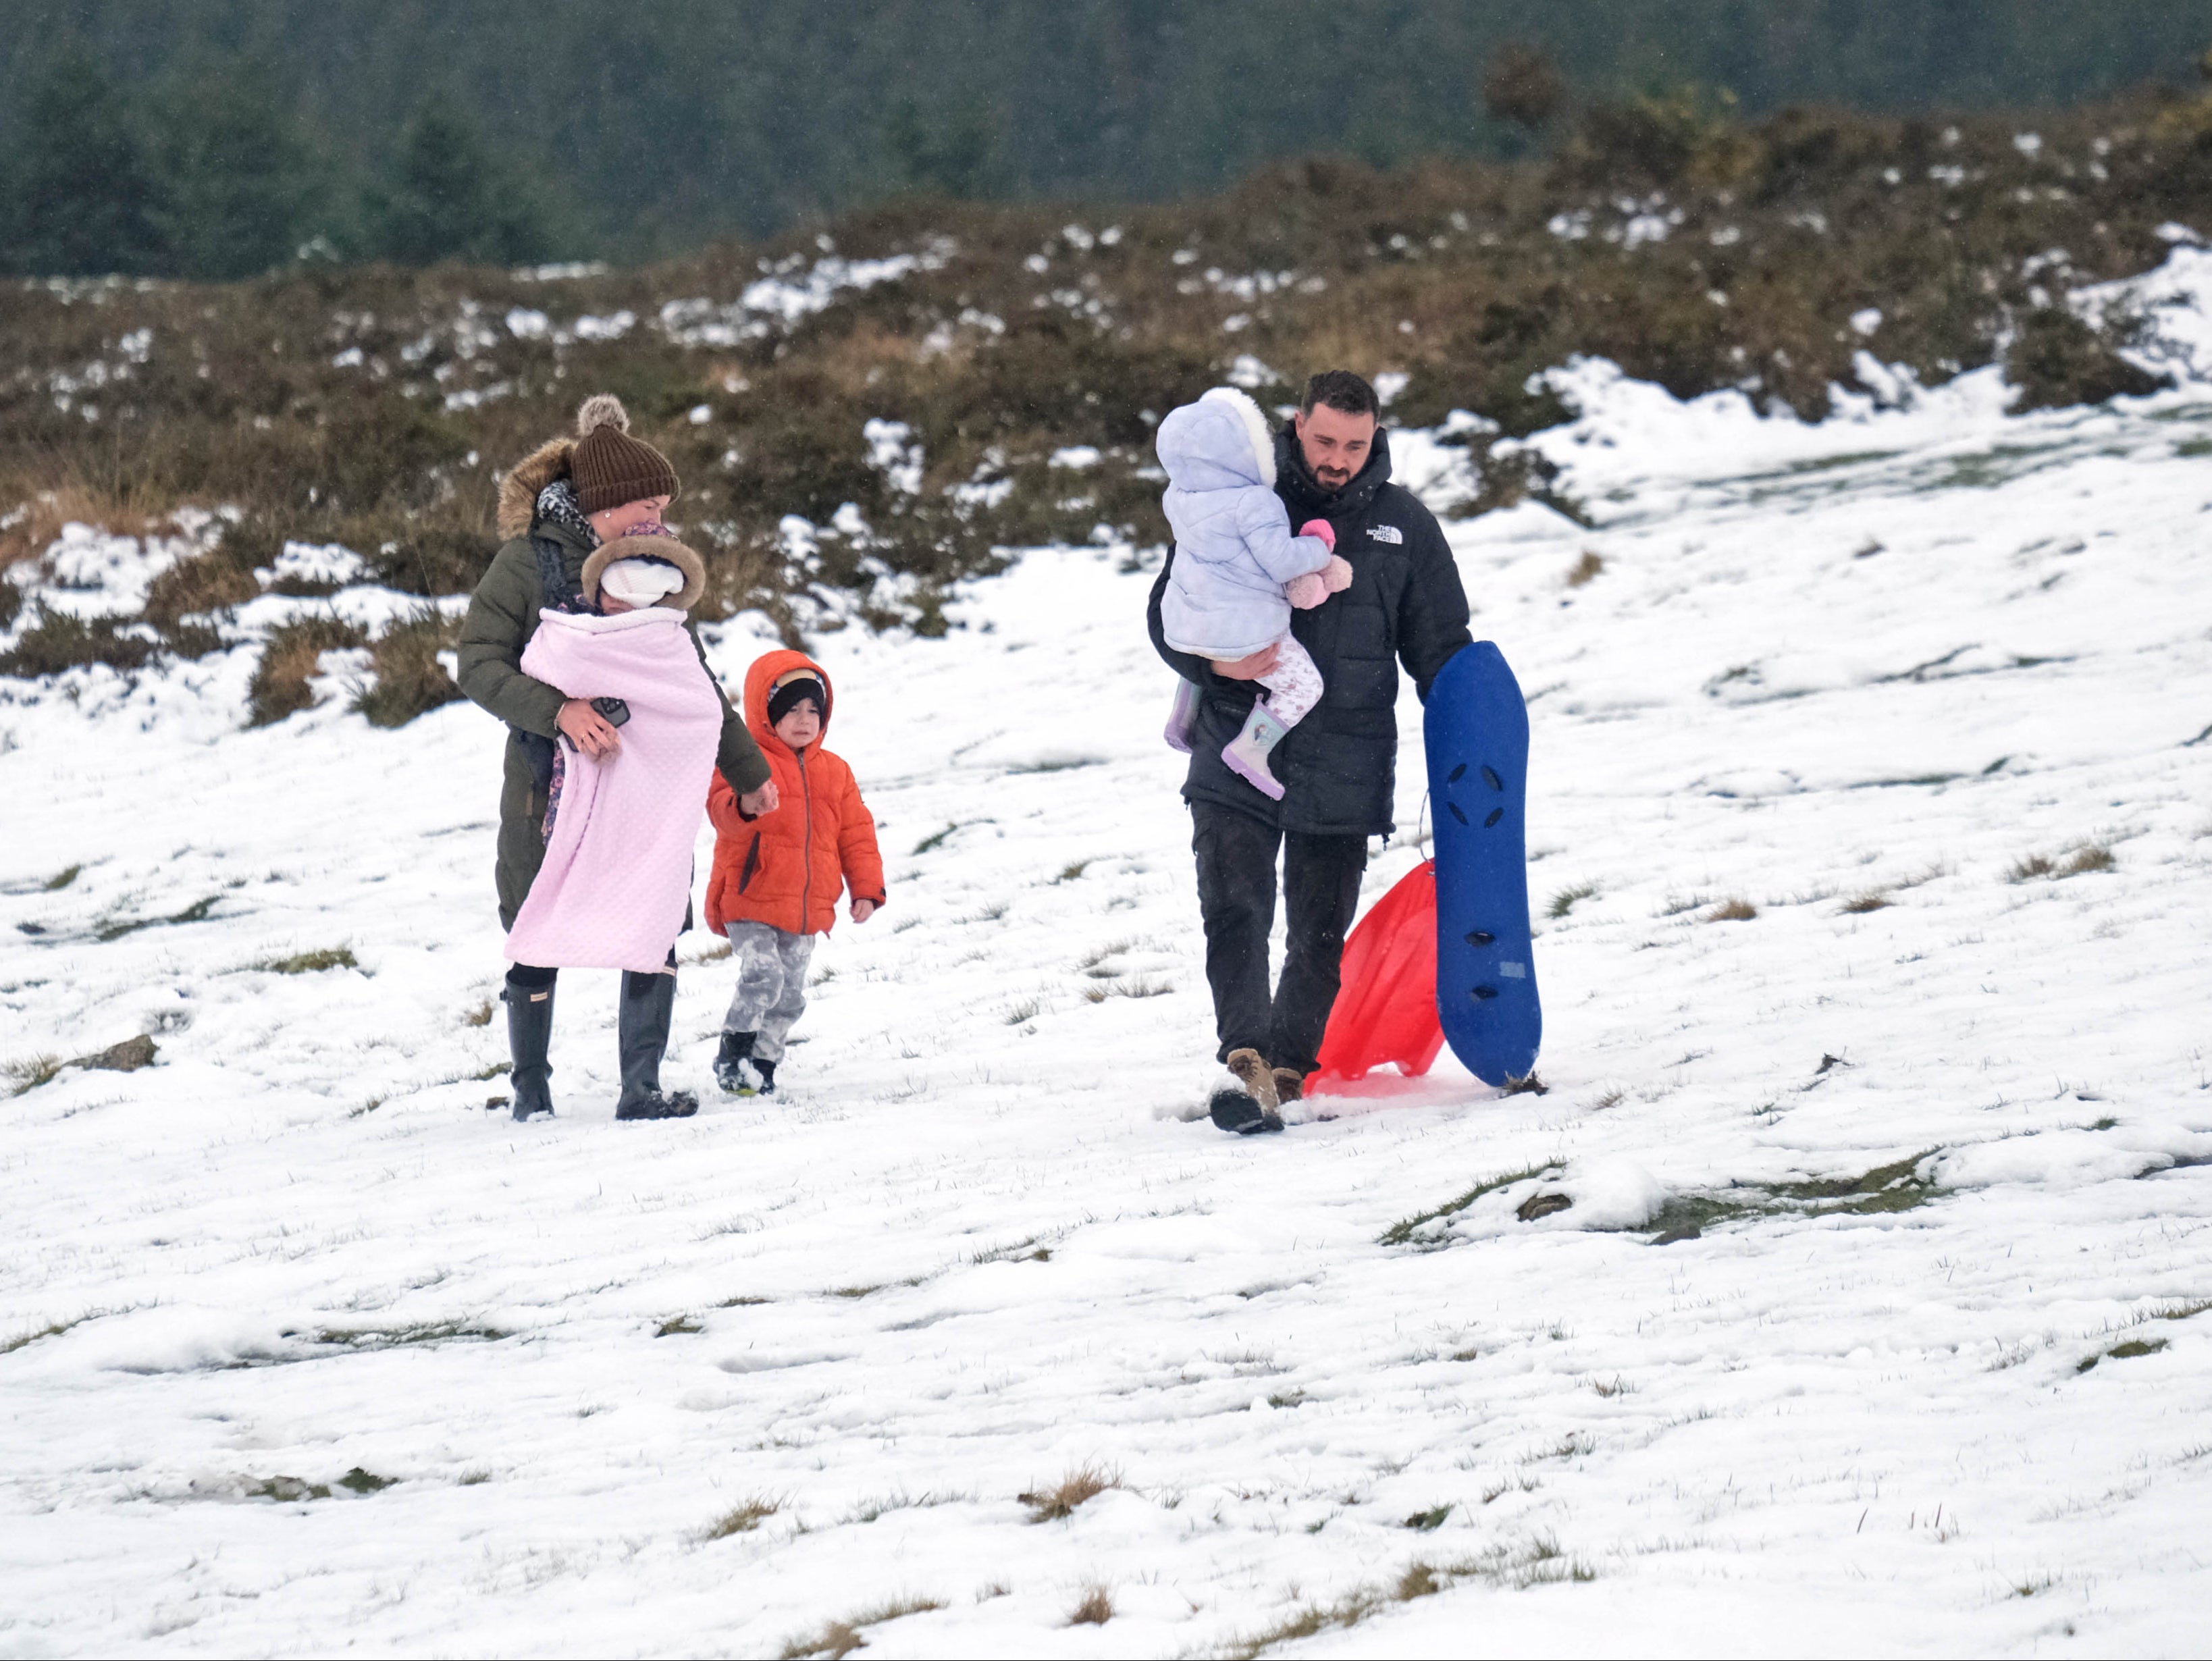 A family make use of the spring snow on Dartmoor to go sledging